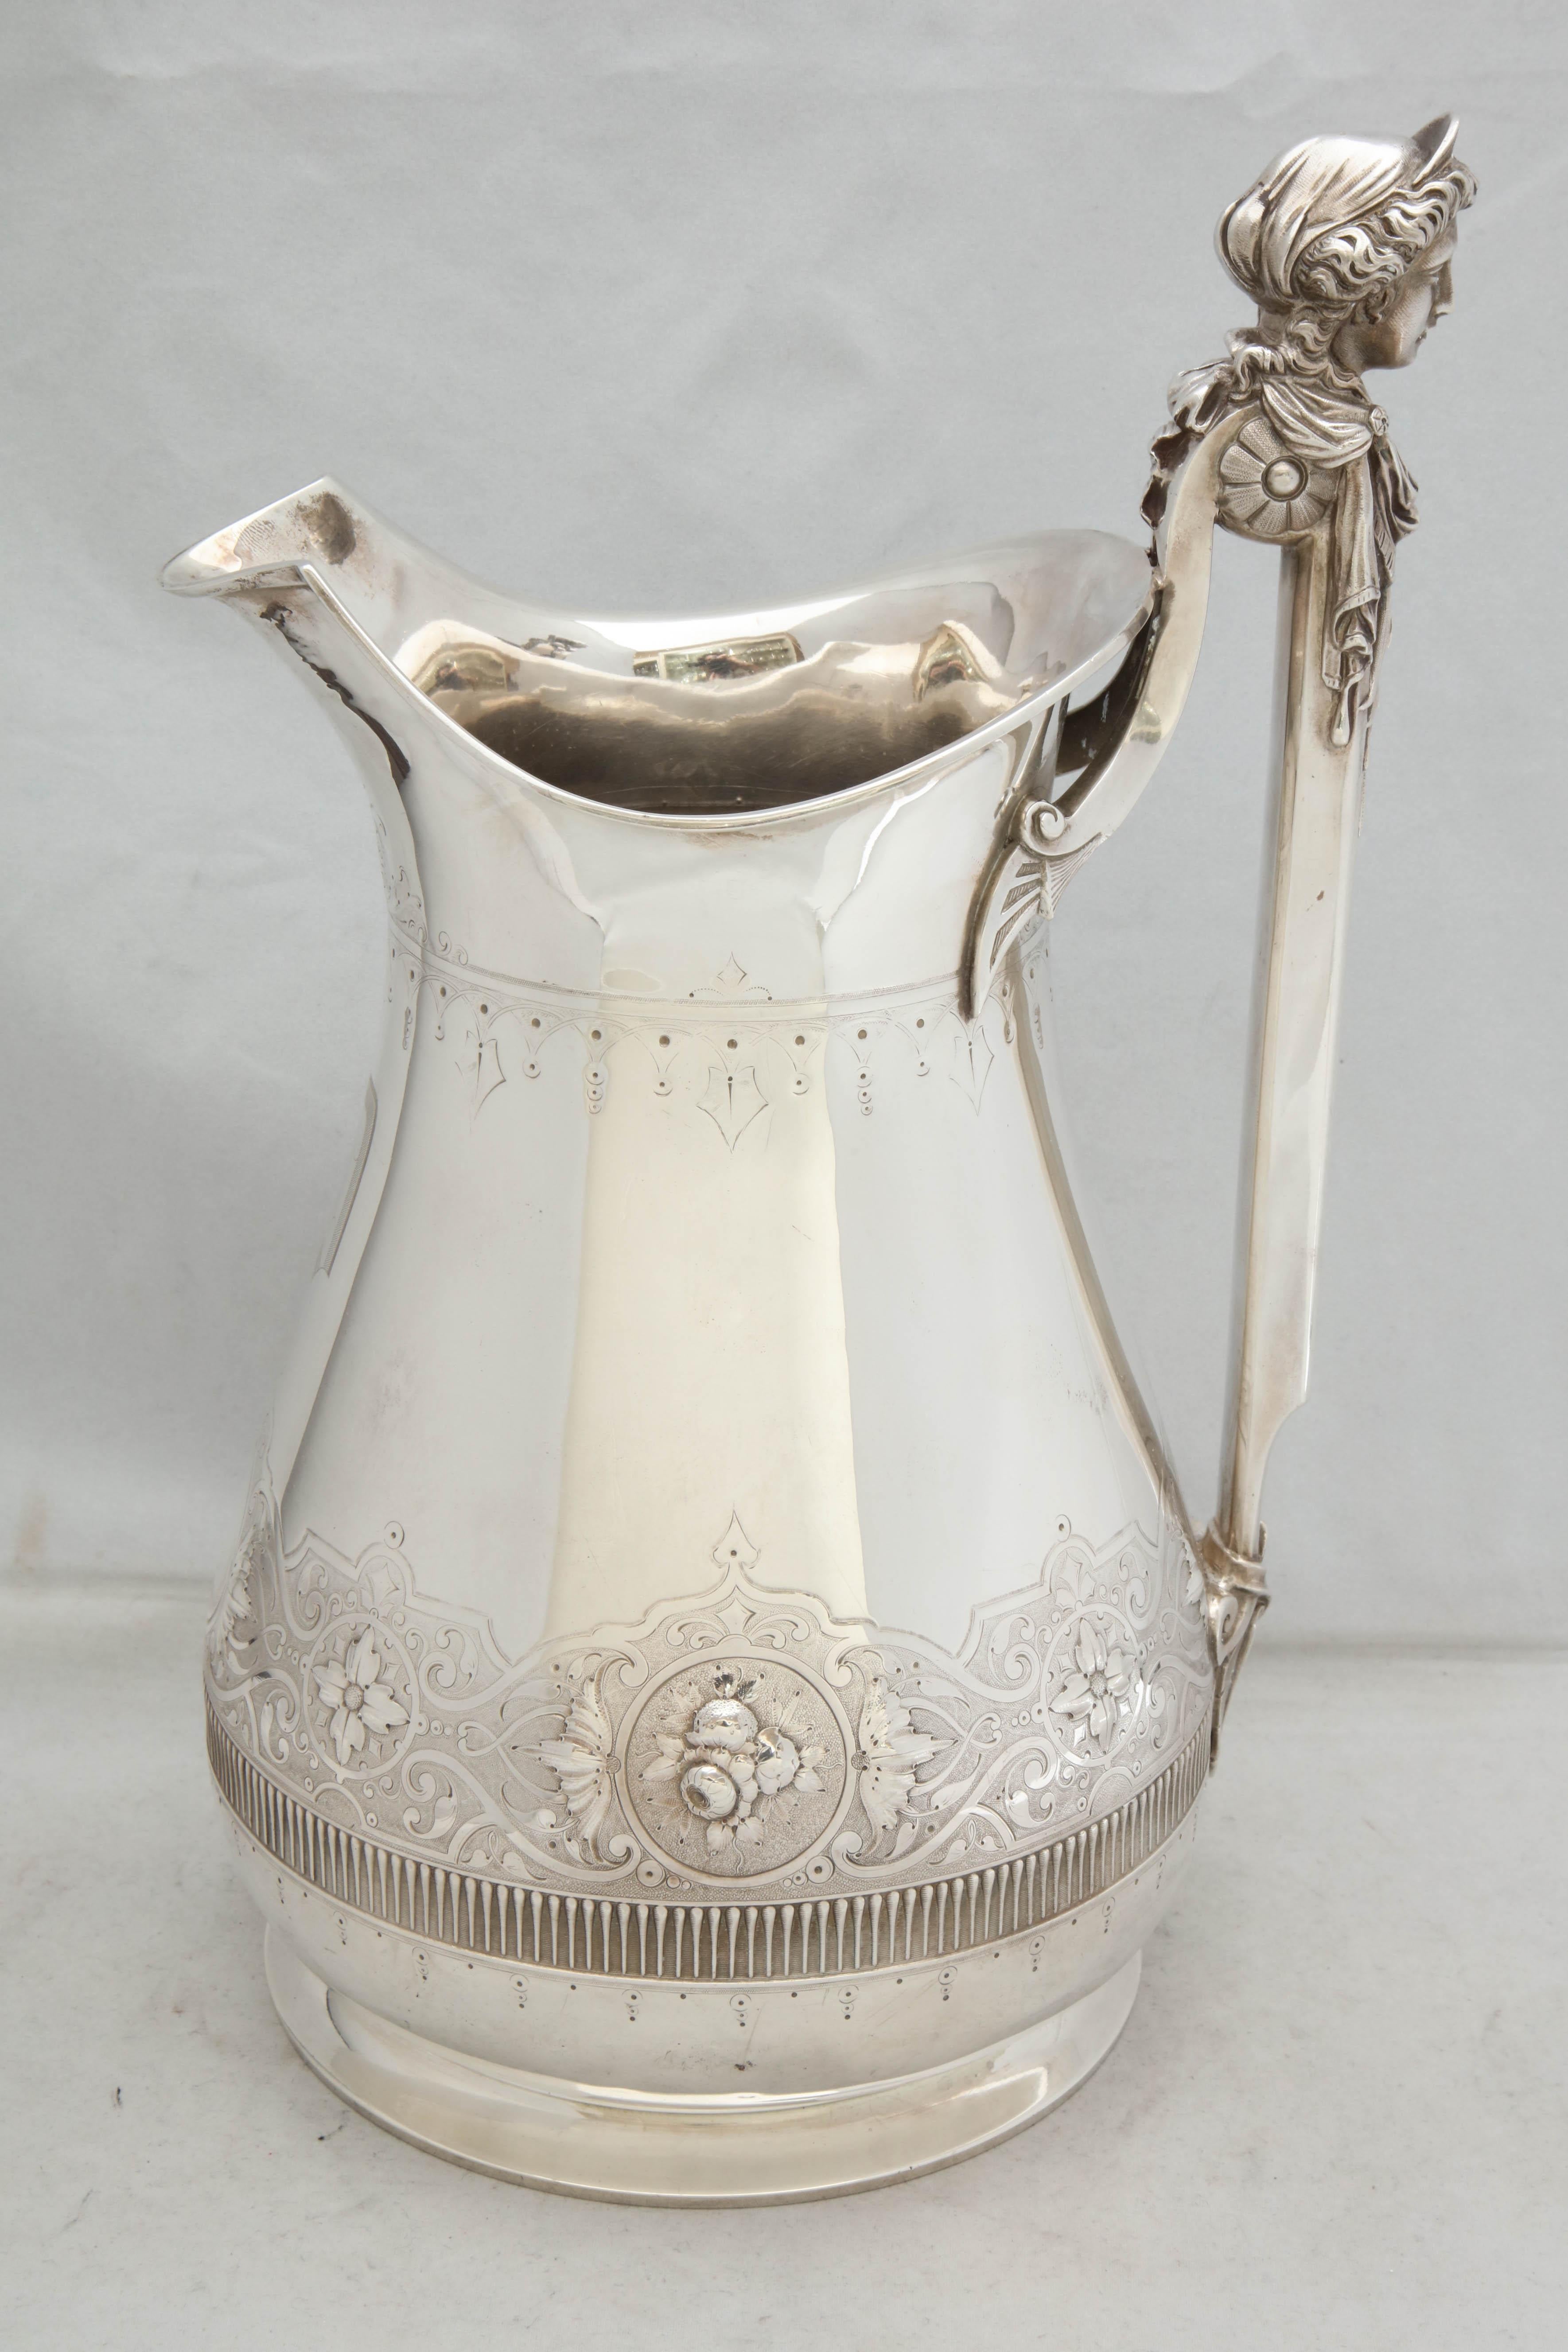 Large, sterling silver, Neoclassical pitcher, Gorham Manufacturing Company, Providence, Rhode Island, circa 1870. Chased with flowers; handle is topped with a classically draped woman's head. Monogrammed with an Old English D. Measures 12 1/2 inches